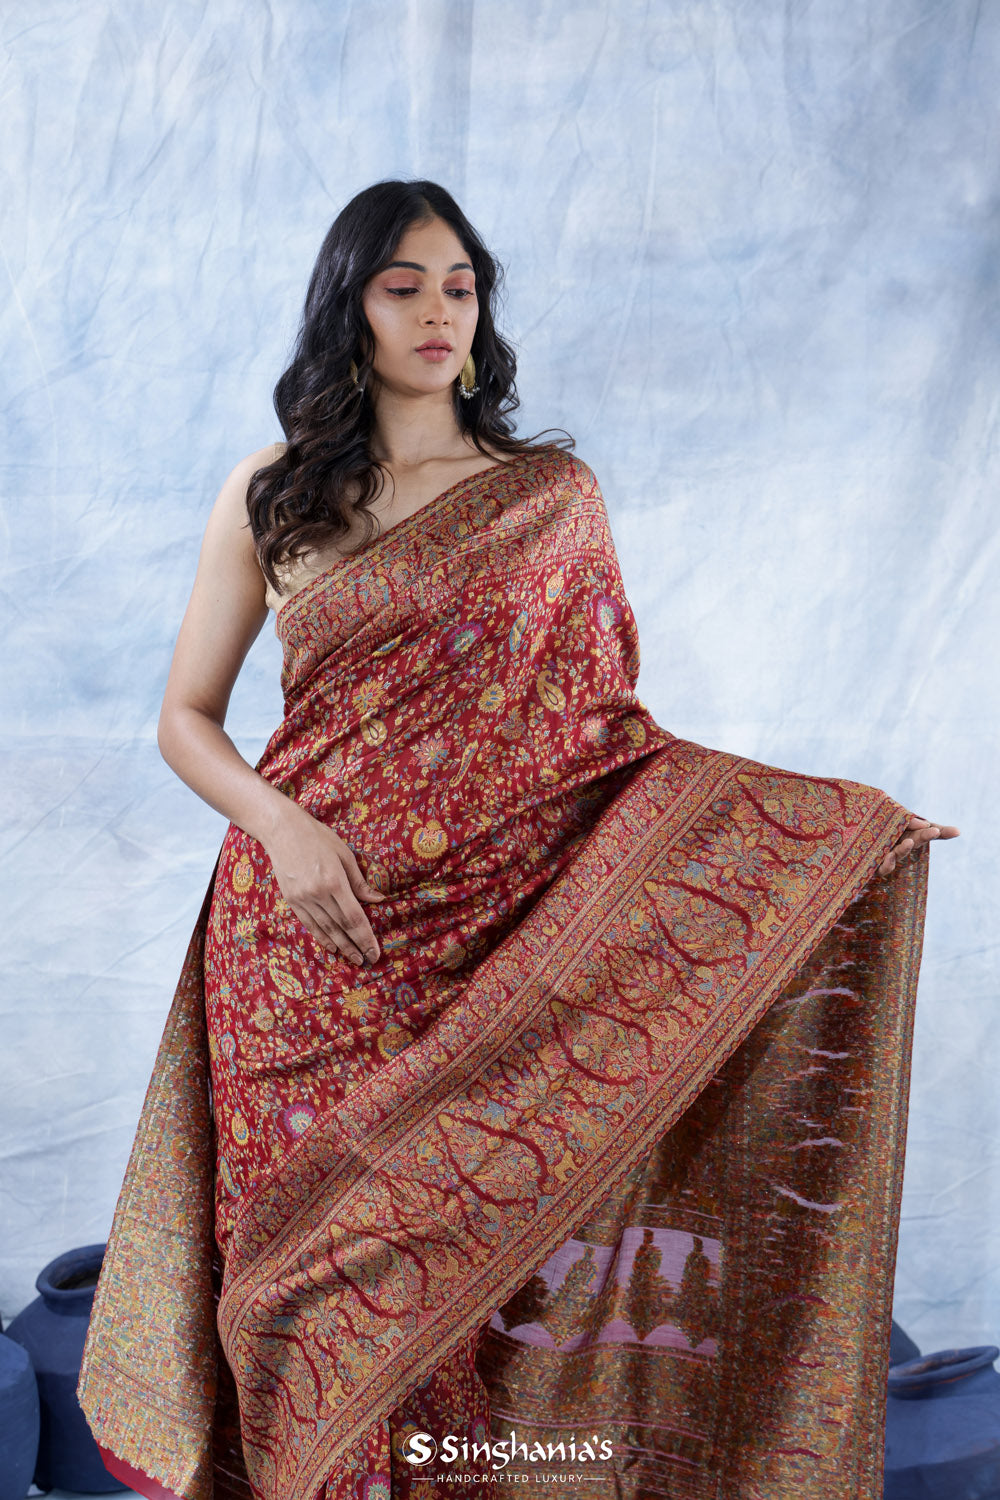 Indian Red Kani Handloom Saree With Floral Motifs